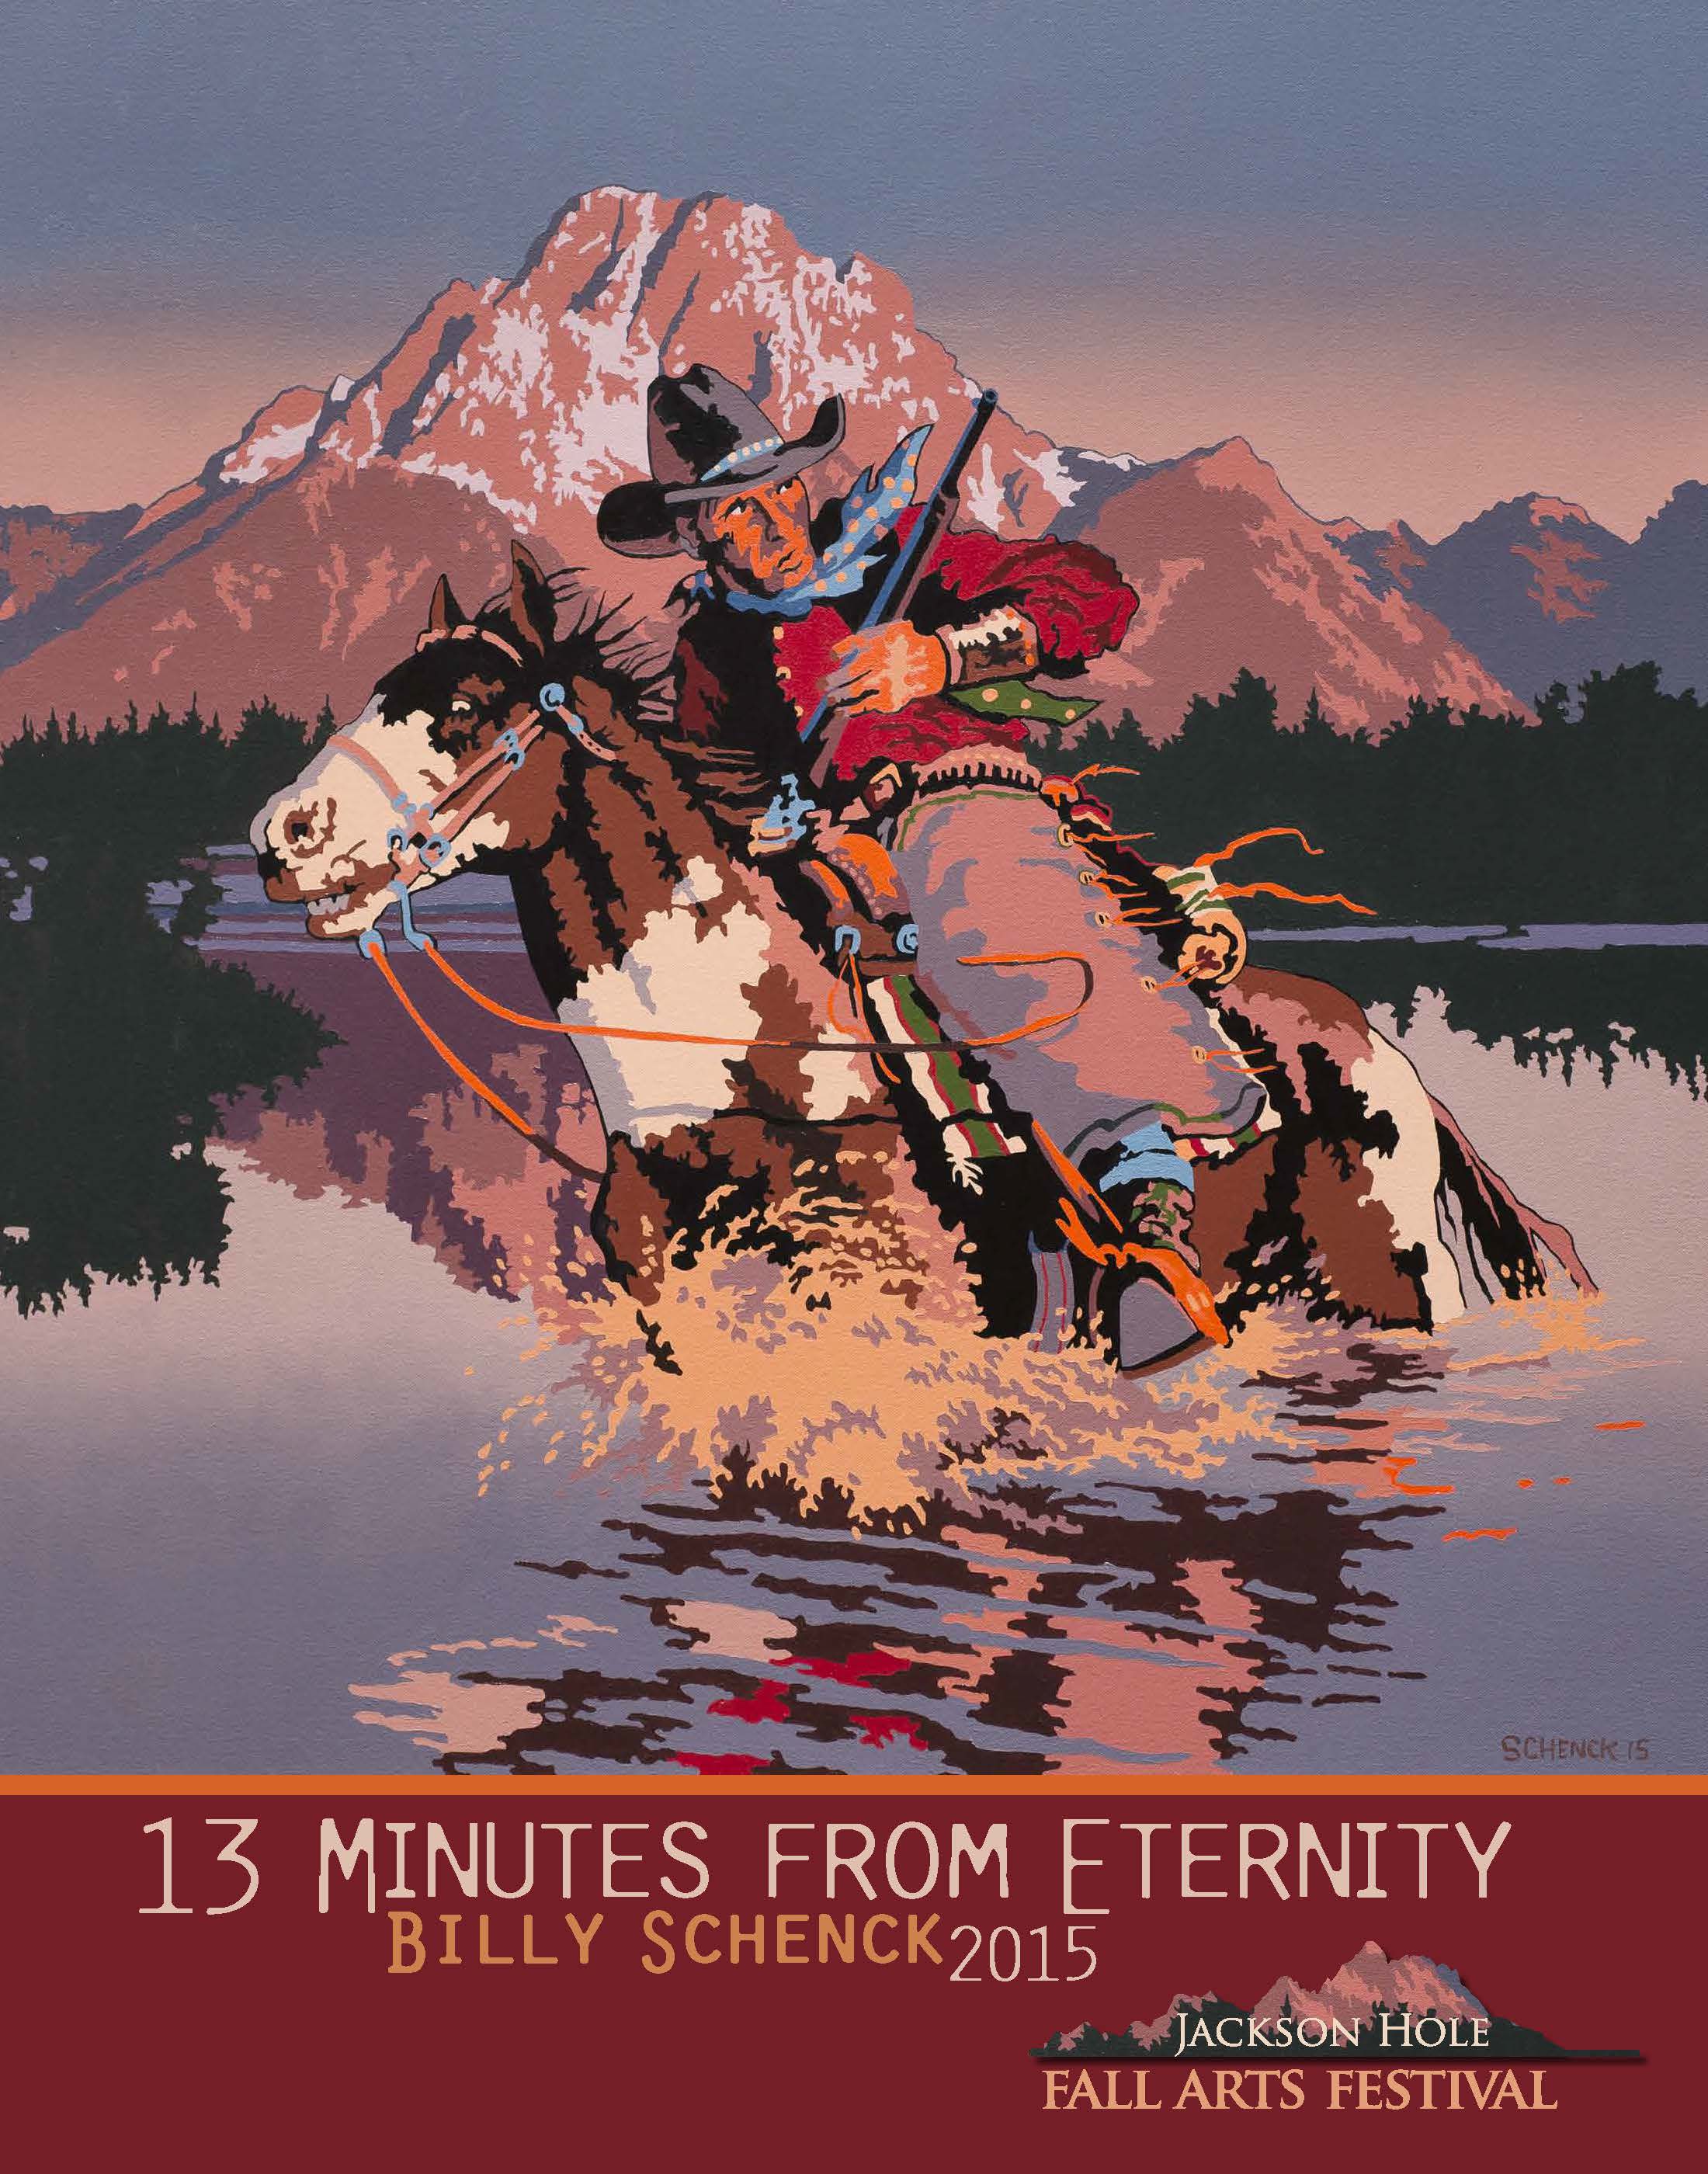 Labels for the new commemorative wines include artwork by featured artist Billy Schenck: oil painting “13 Minutes From Eternity,” also depicted on the  2015 Jackson Hole Fall Arts Festival poster.